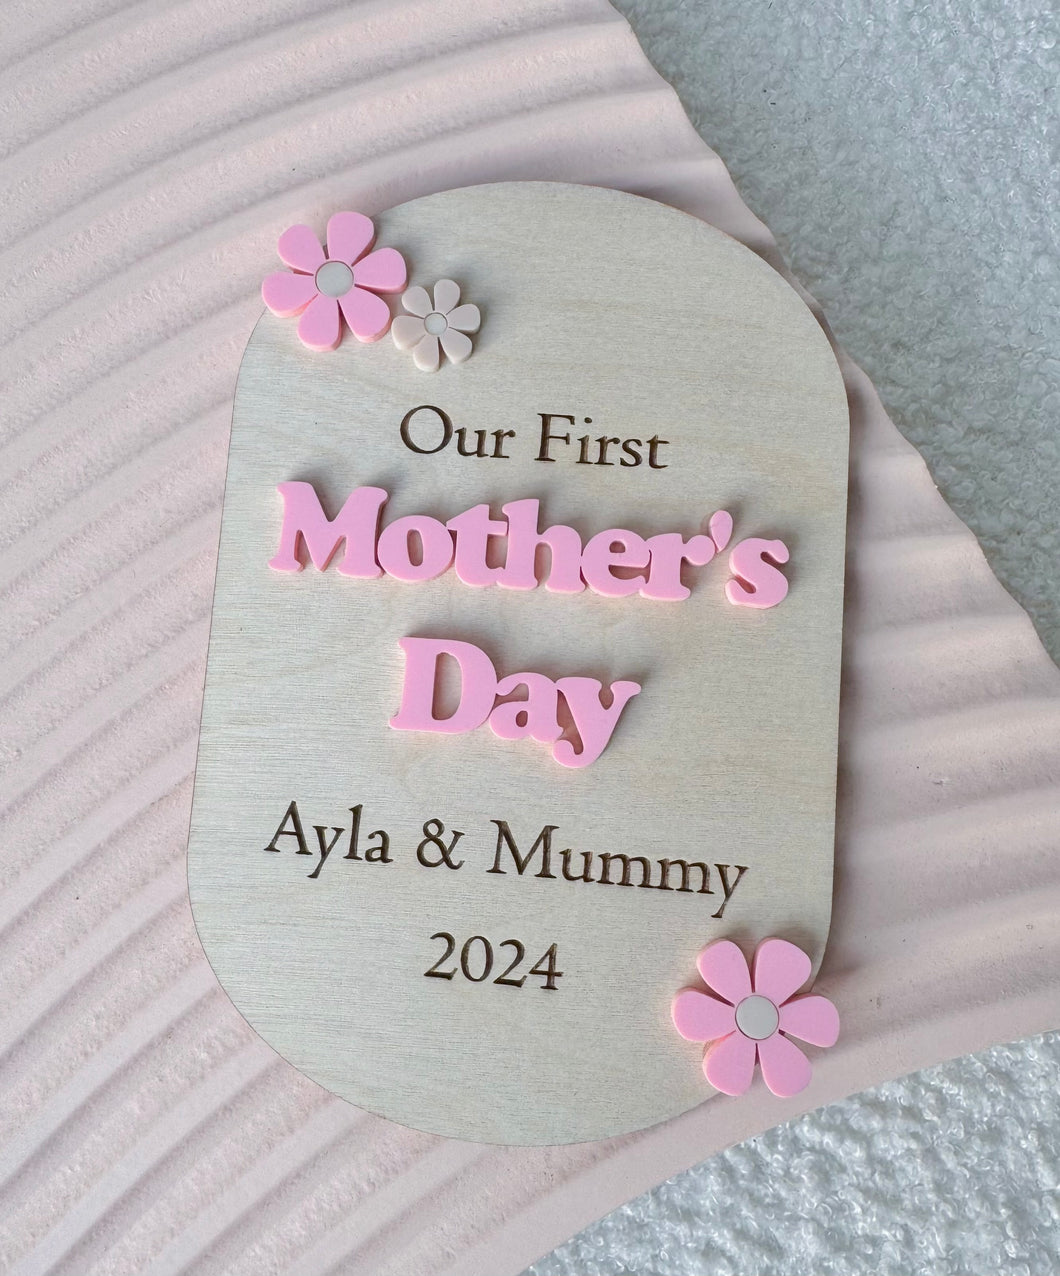 Our First Mothers Day Daisy Plaque